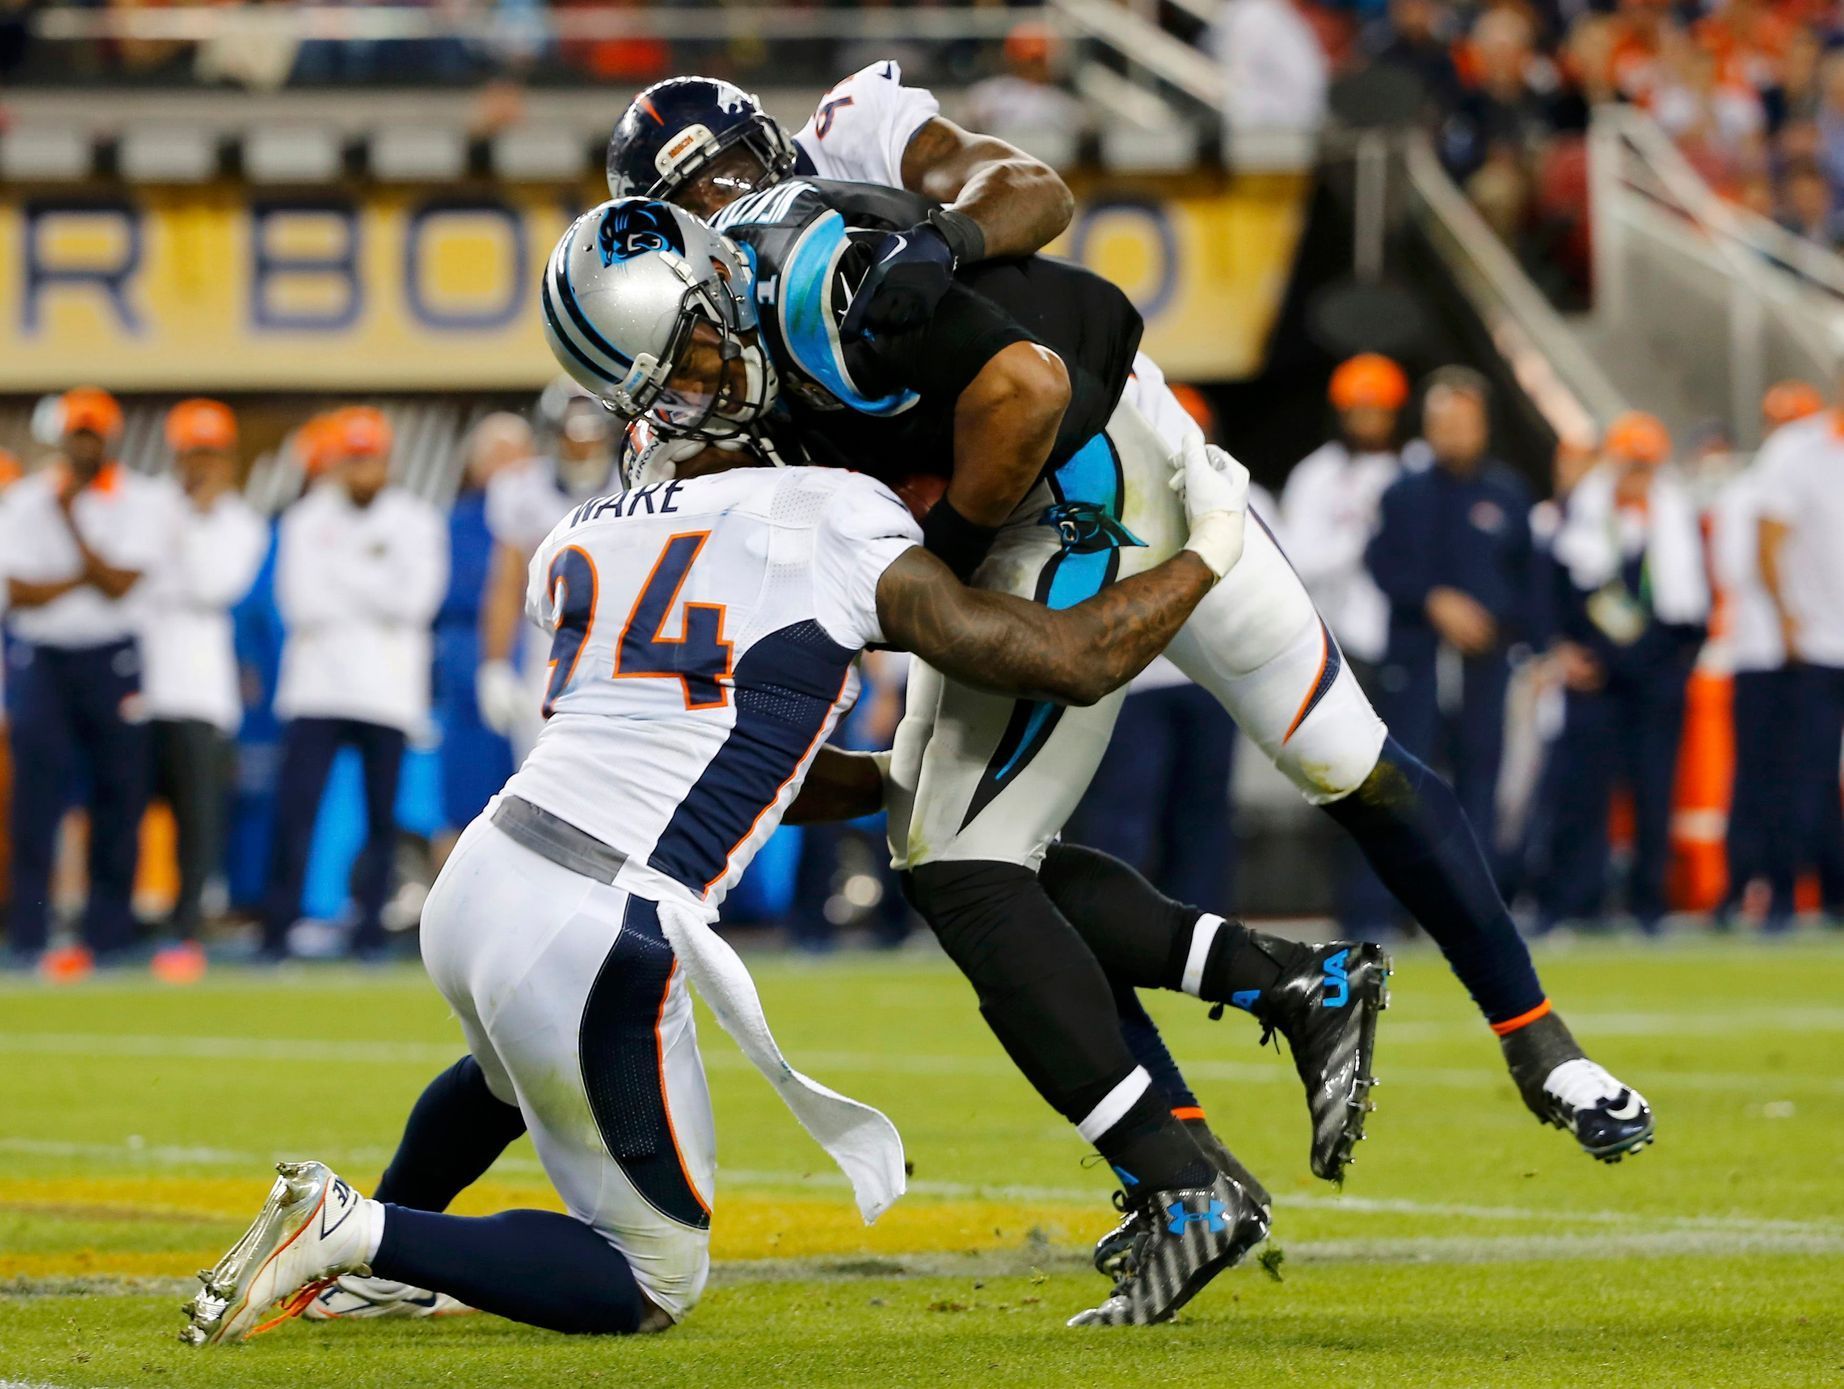 Carolina Panthers' quarterback Newton is sacked by Denver Broncos' Ware during the third quarter of the NFL's Super Bowl 50 football game in Santa Clara